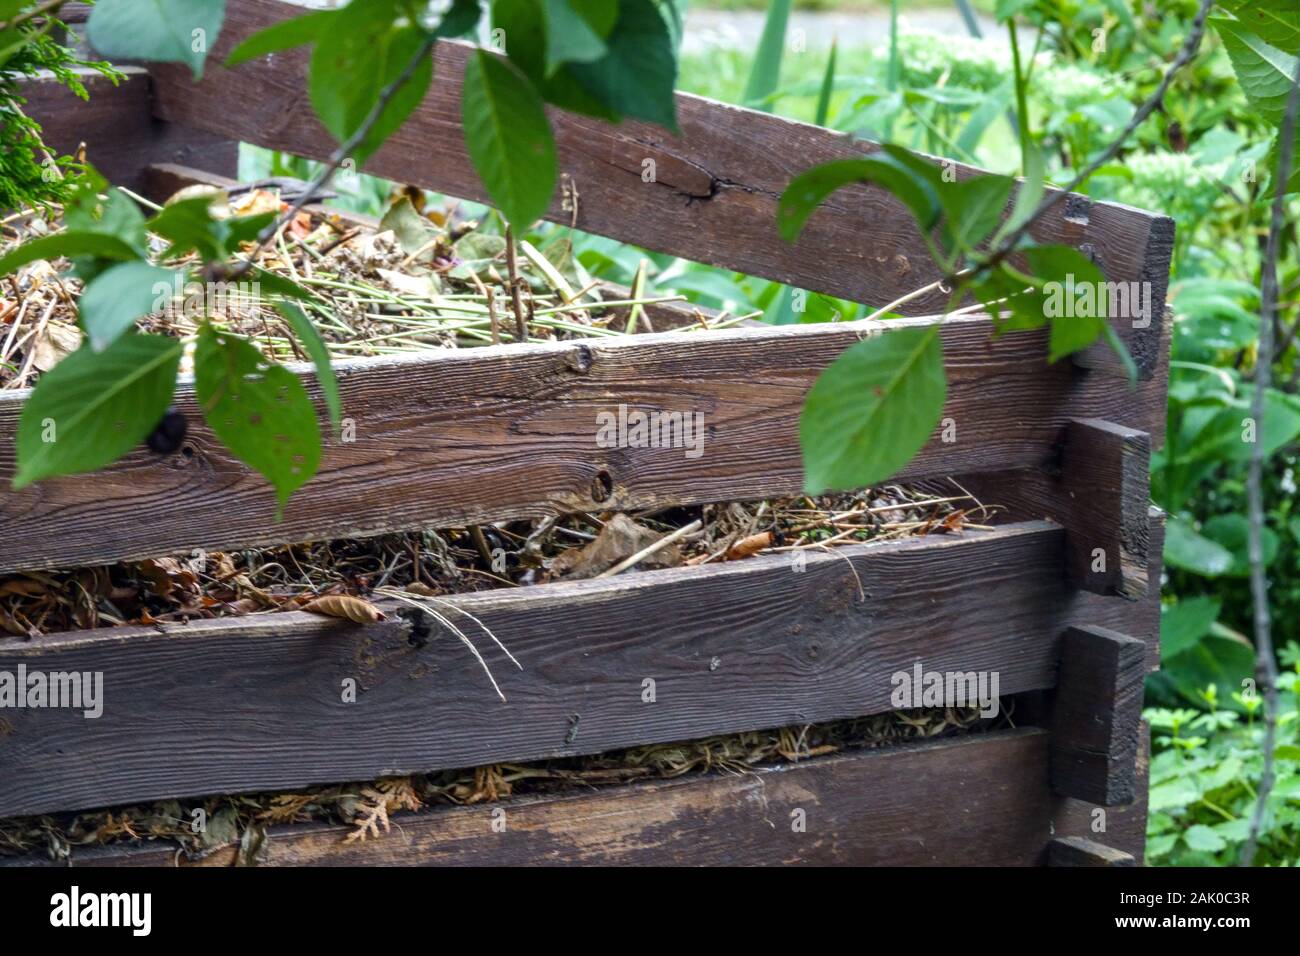 A wooden compost bin Stock Photo